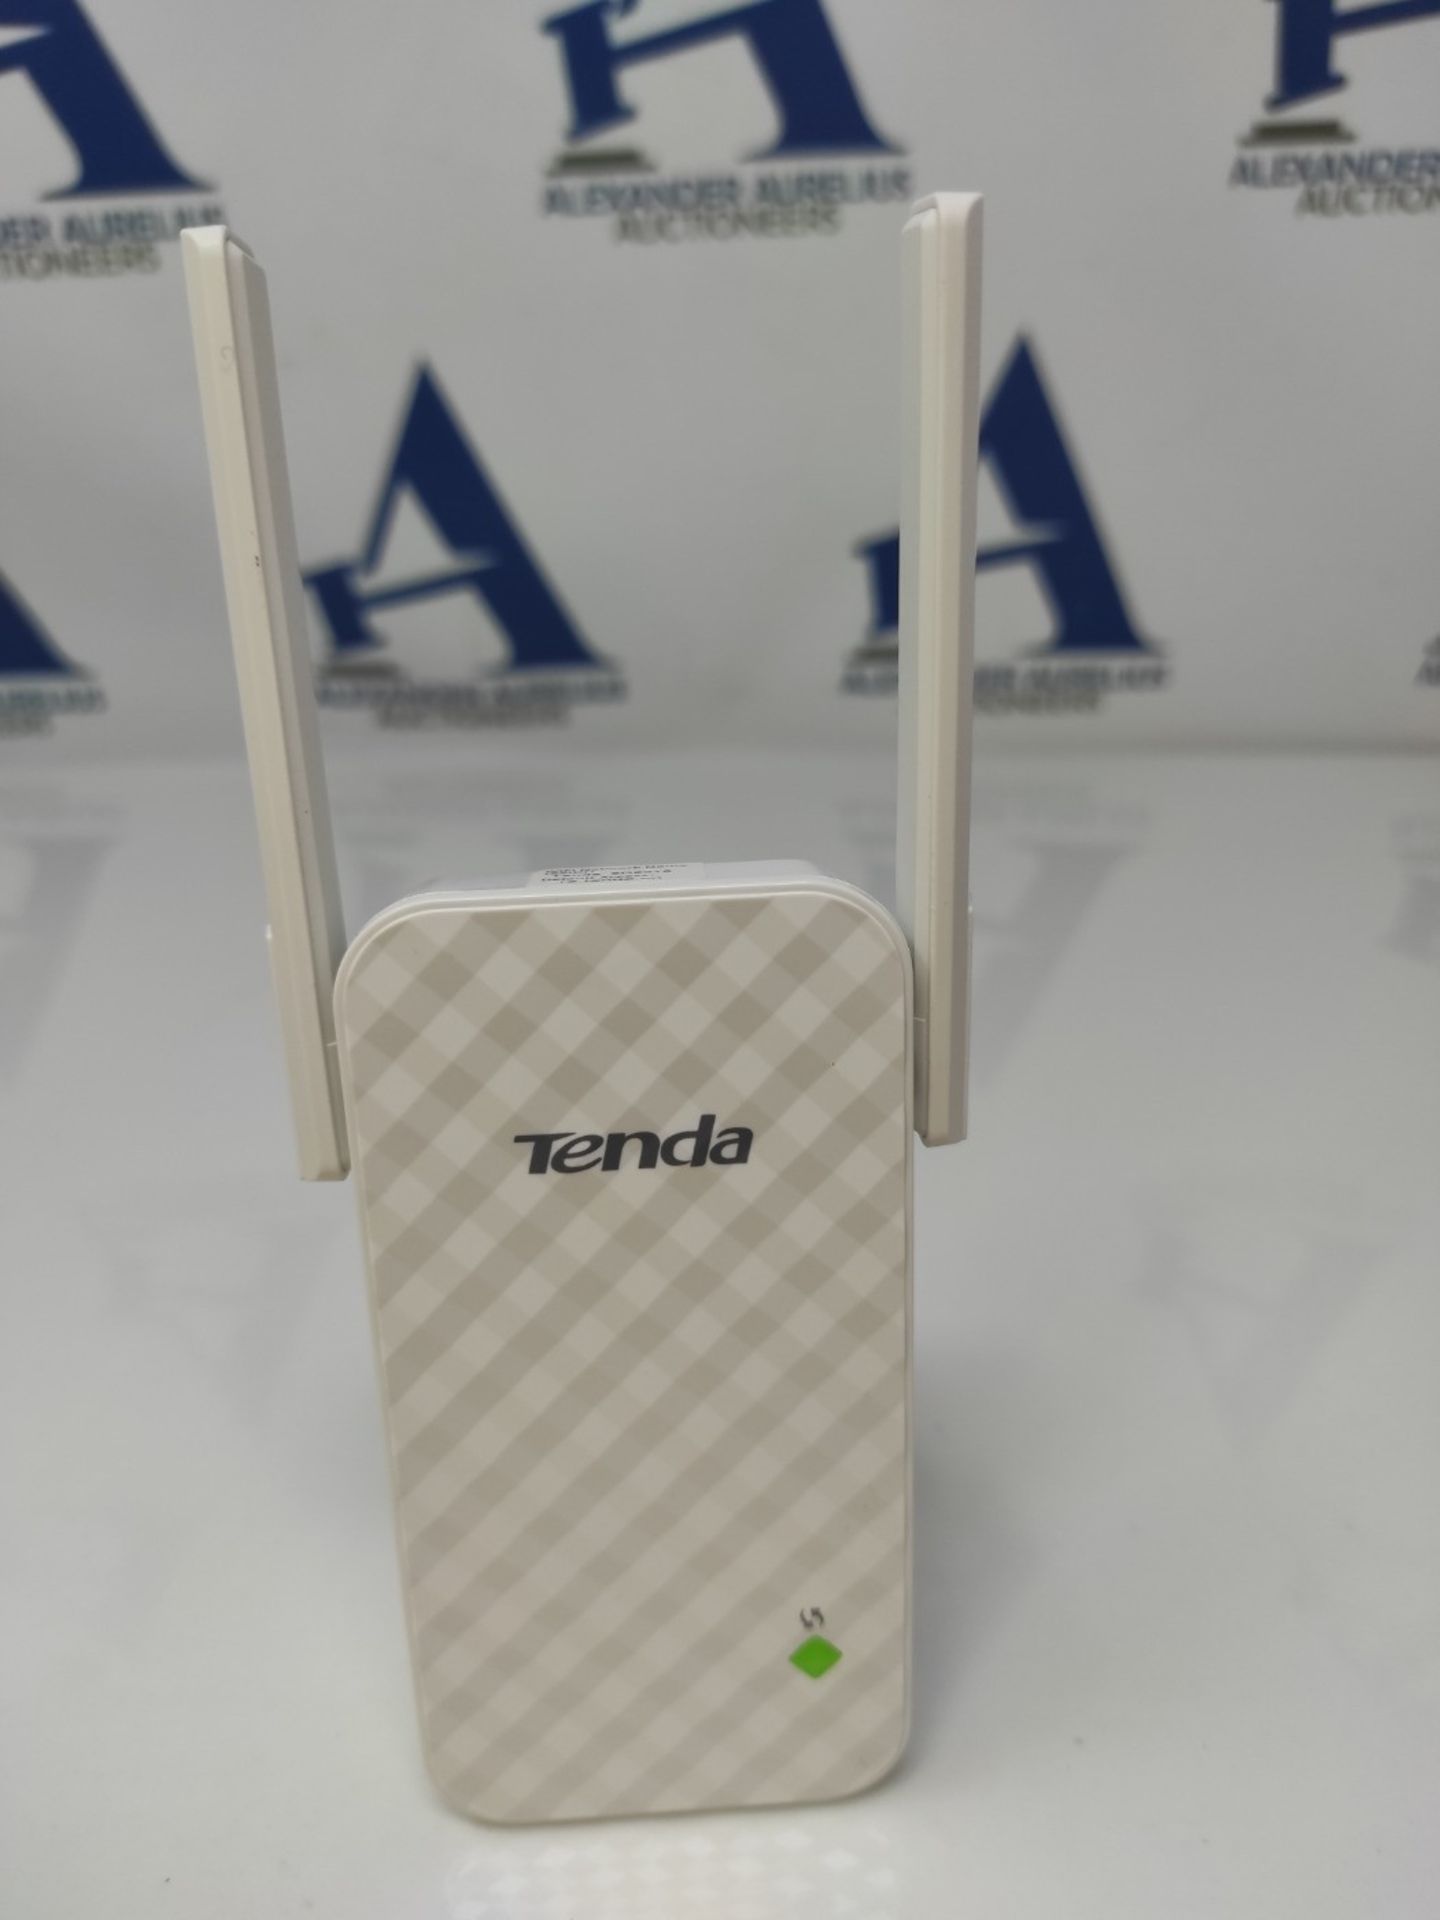 Tenda A9 WiFi Wireless Repeater 300 Mbps, Access Point and Universal Range Extender St - Image 2 of 3